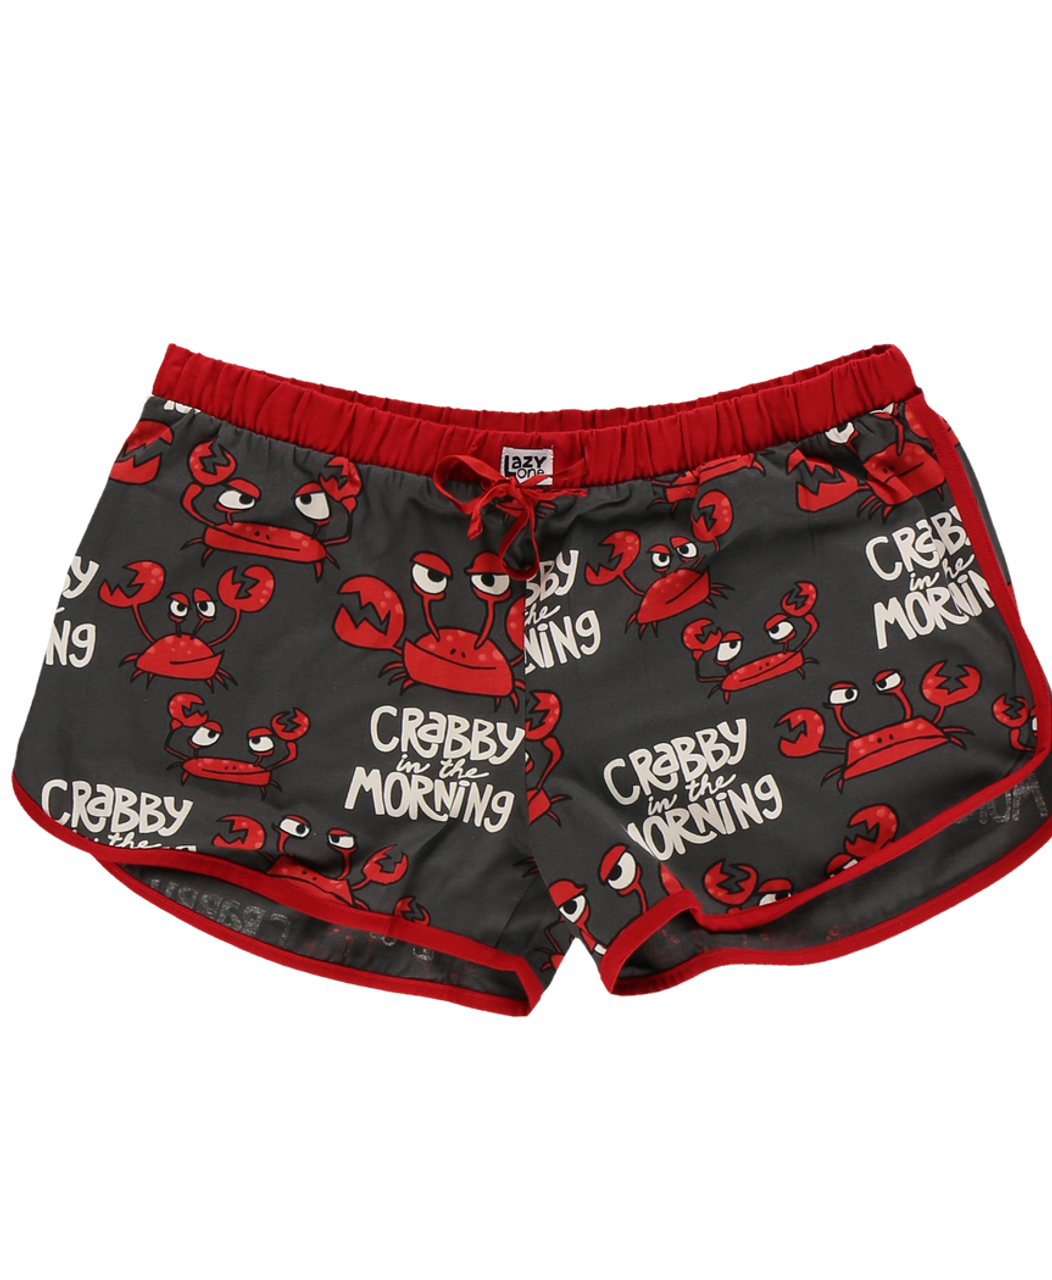 Crabby in the Morning Pajama Shorts